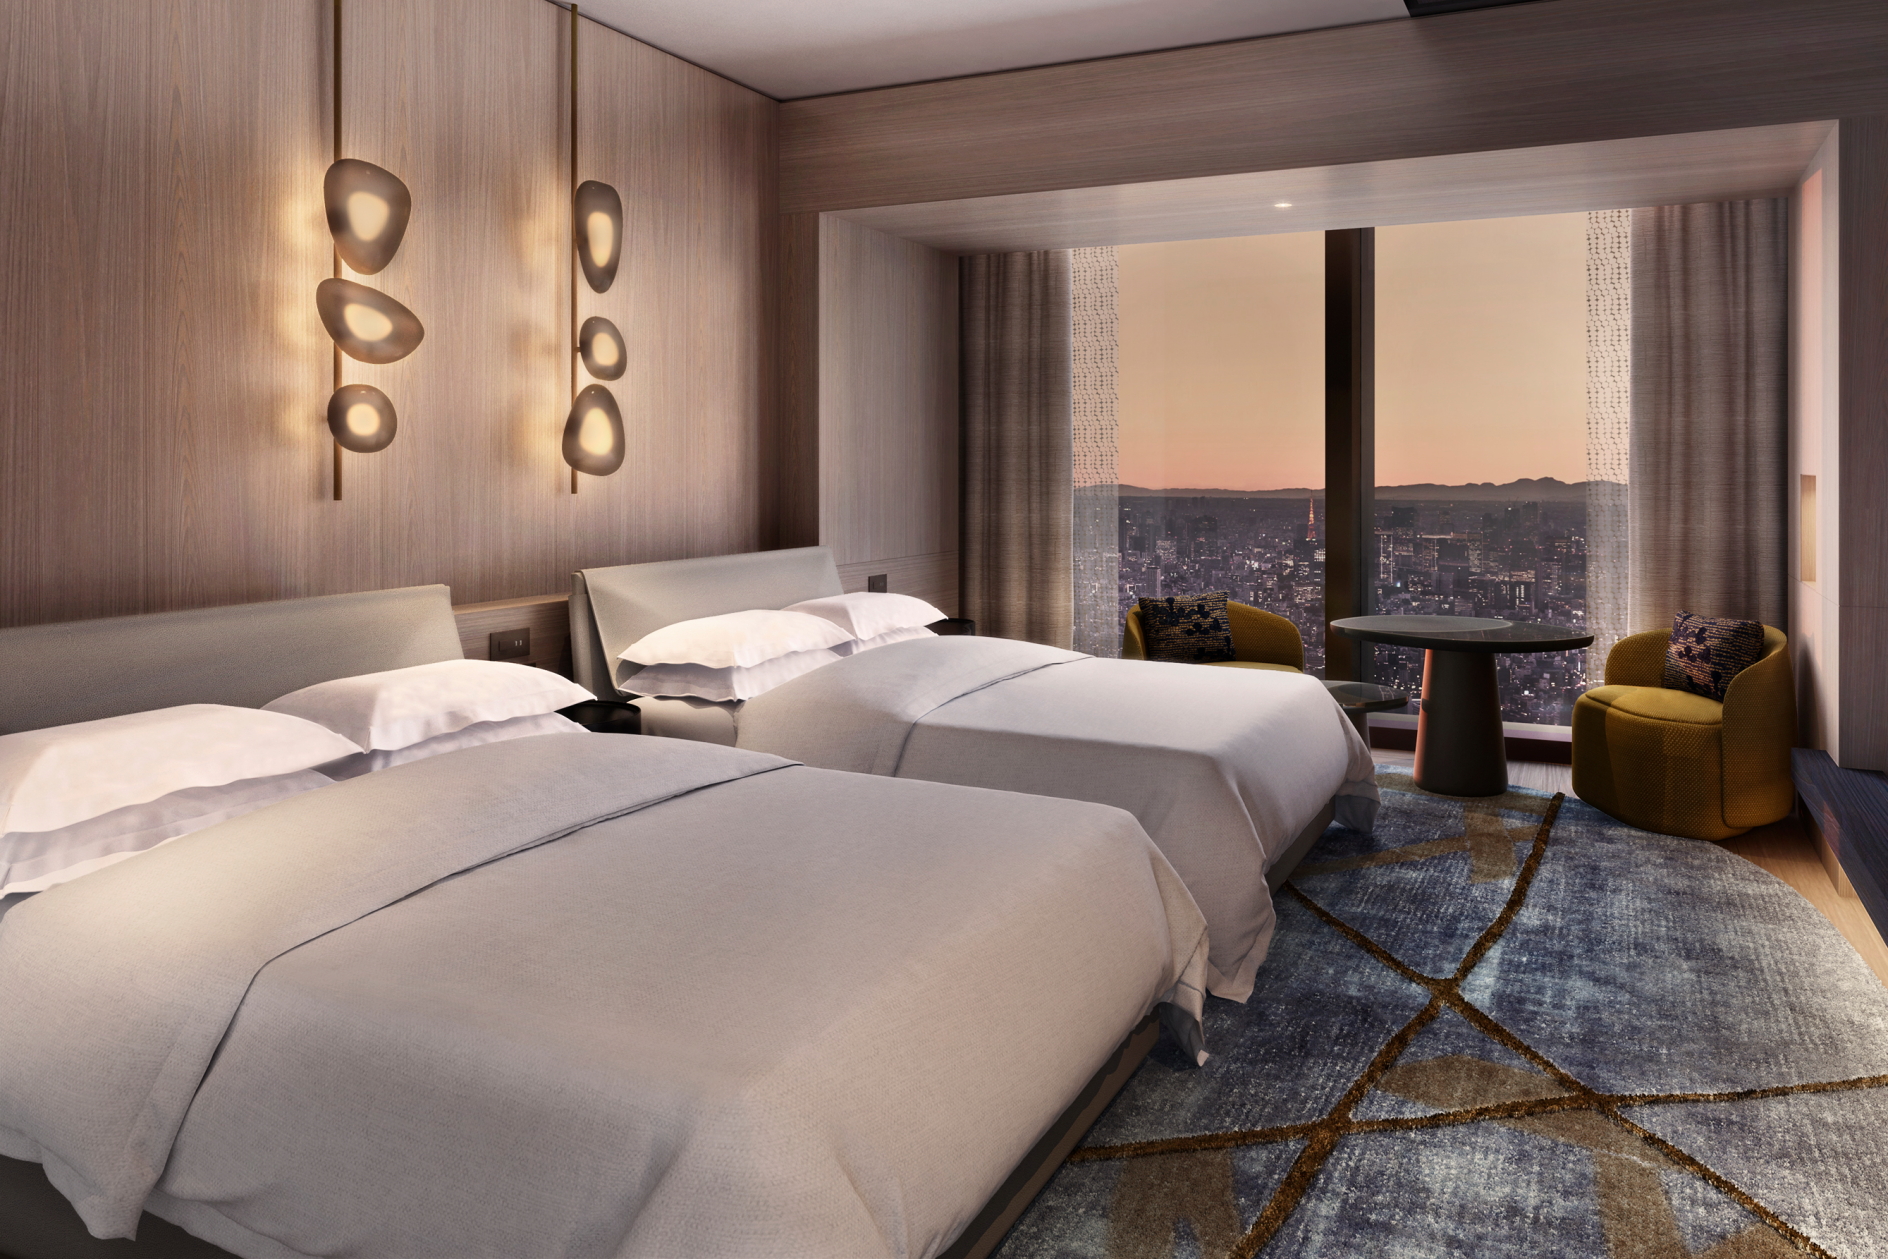 Rendering of a Room at JW Marriott Tokyo. Click to enlarge.